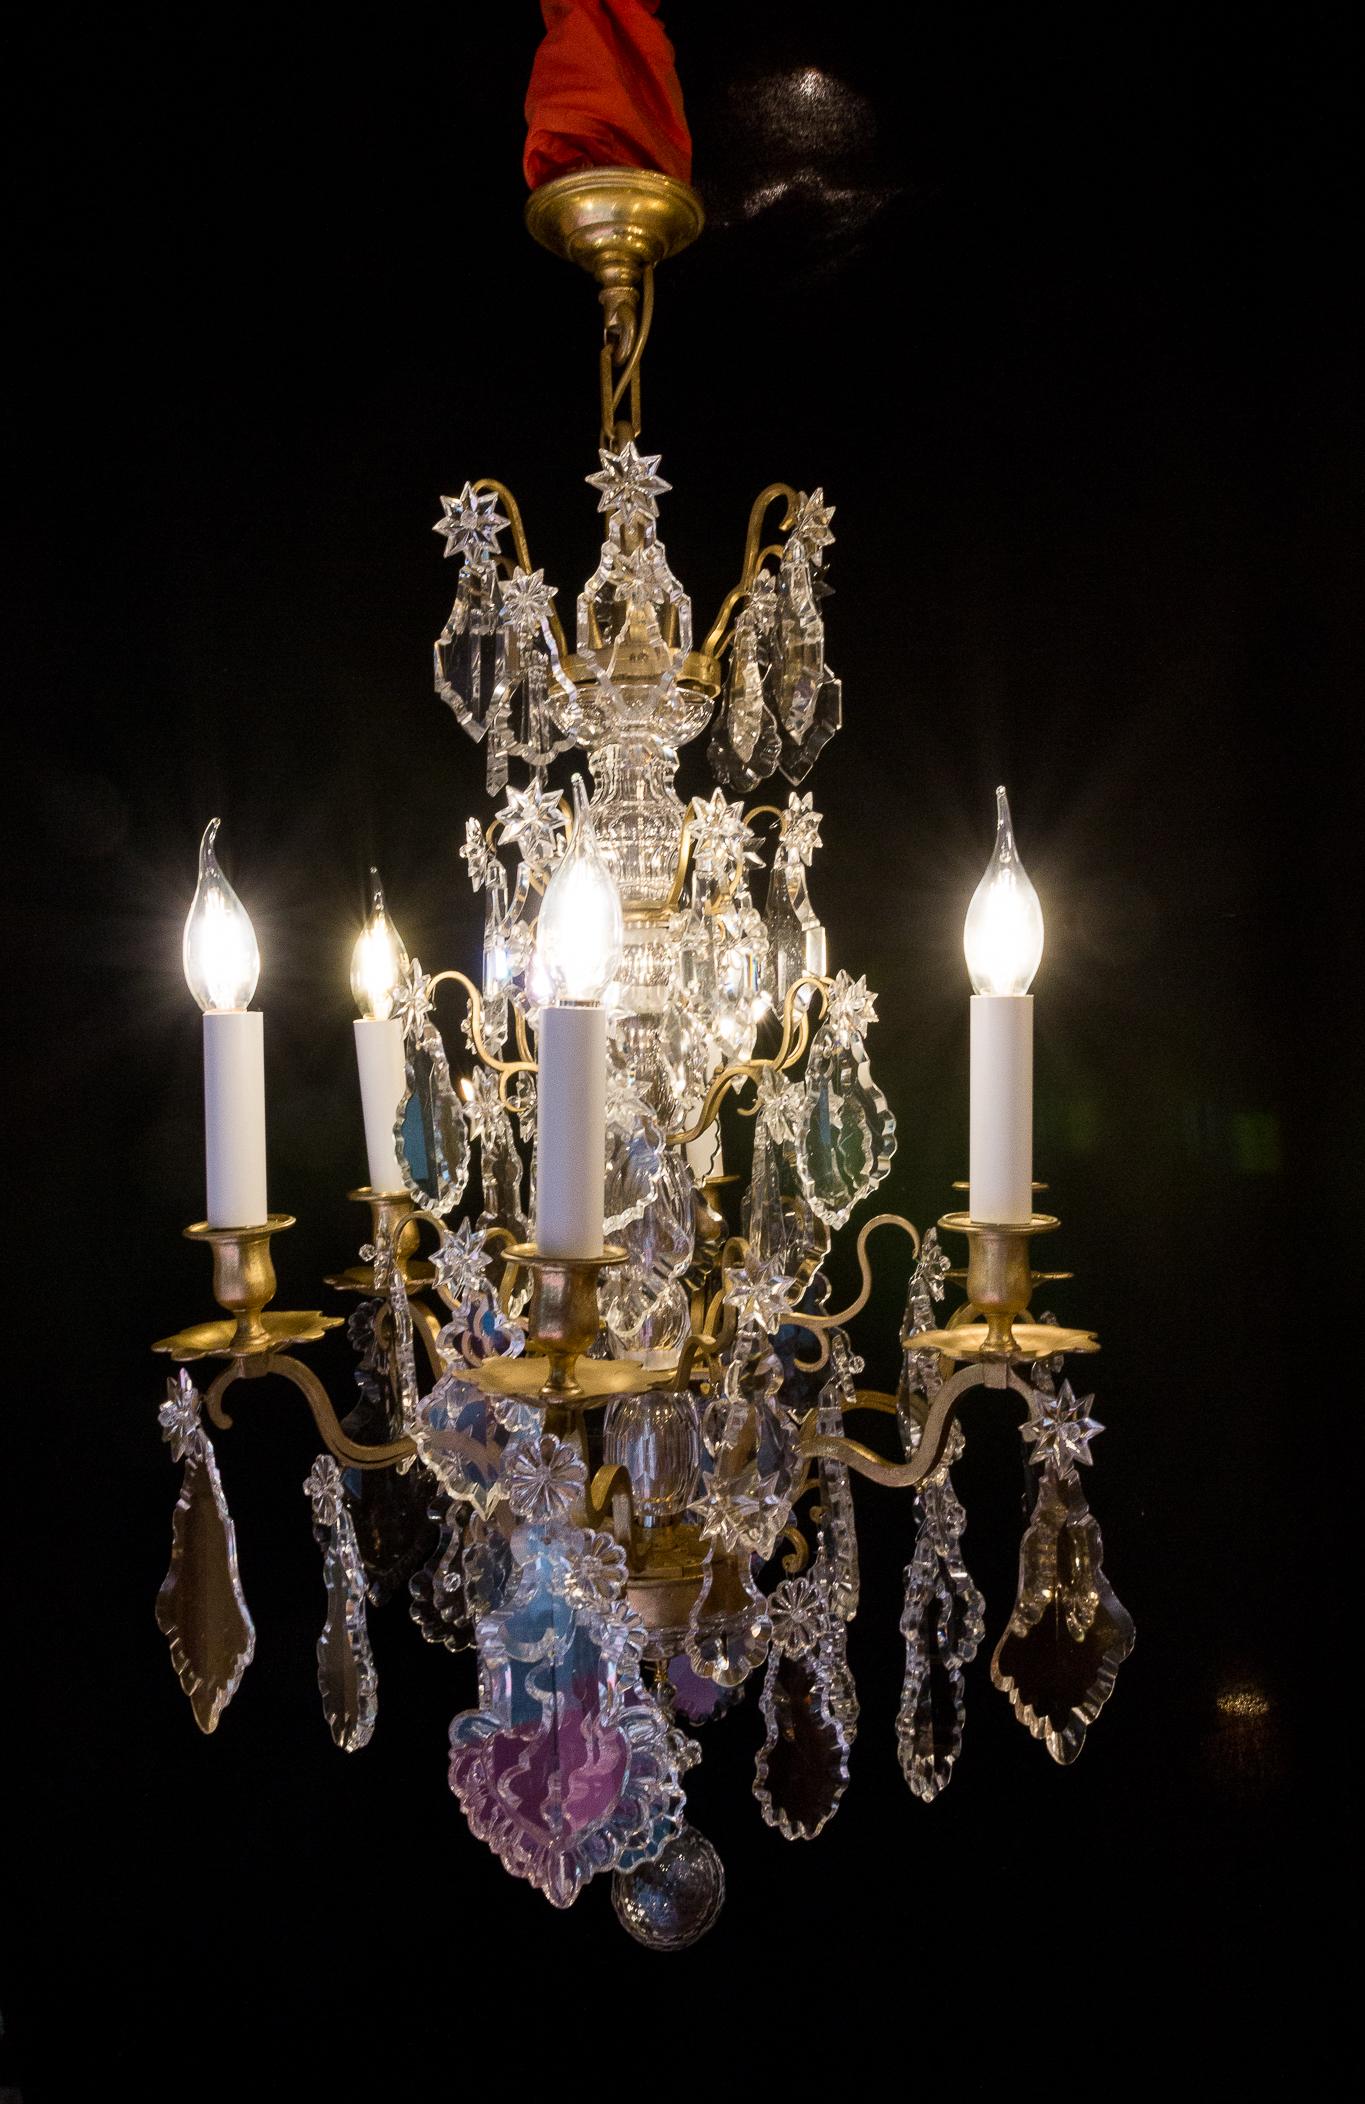 French Louis XVI style gilt-bronze and Baccarat crystal chandelier, circa 1880.

An elegant and decorative gilt-bronze and cut crystal chandelier in the classic French Louis XVI style, attributed to The Cristalleries de Baccarat.
Our chandelier